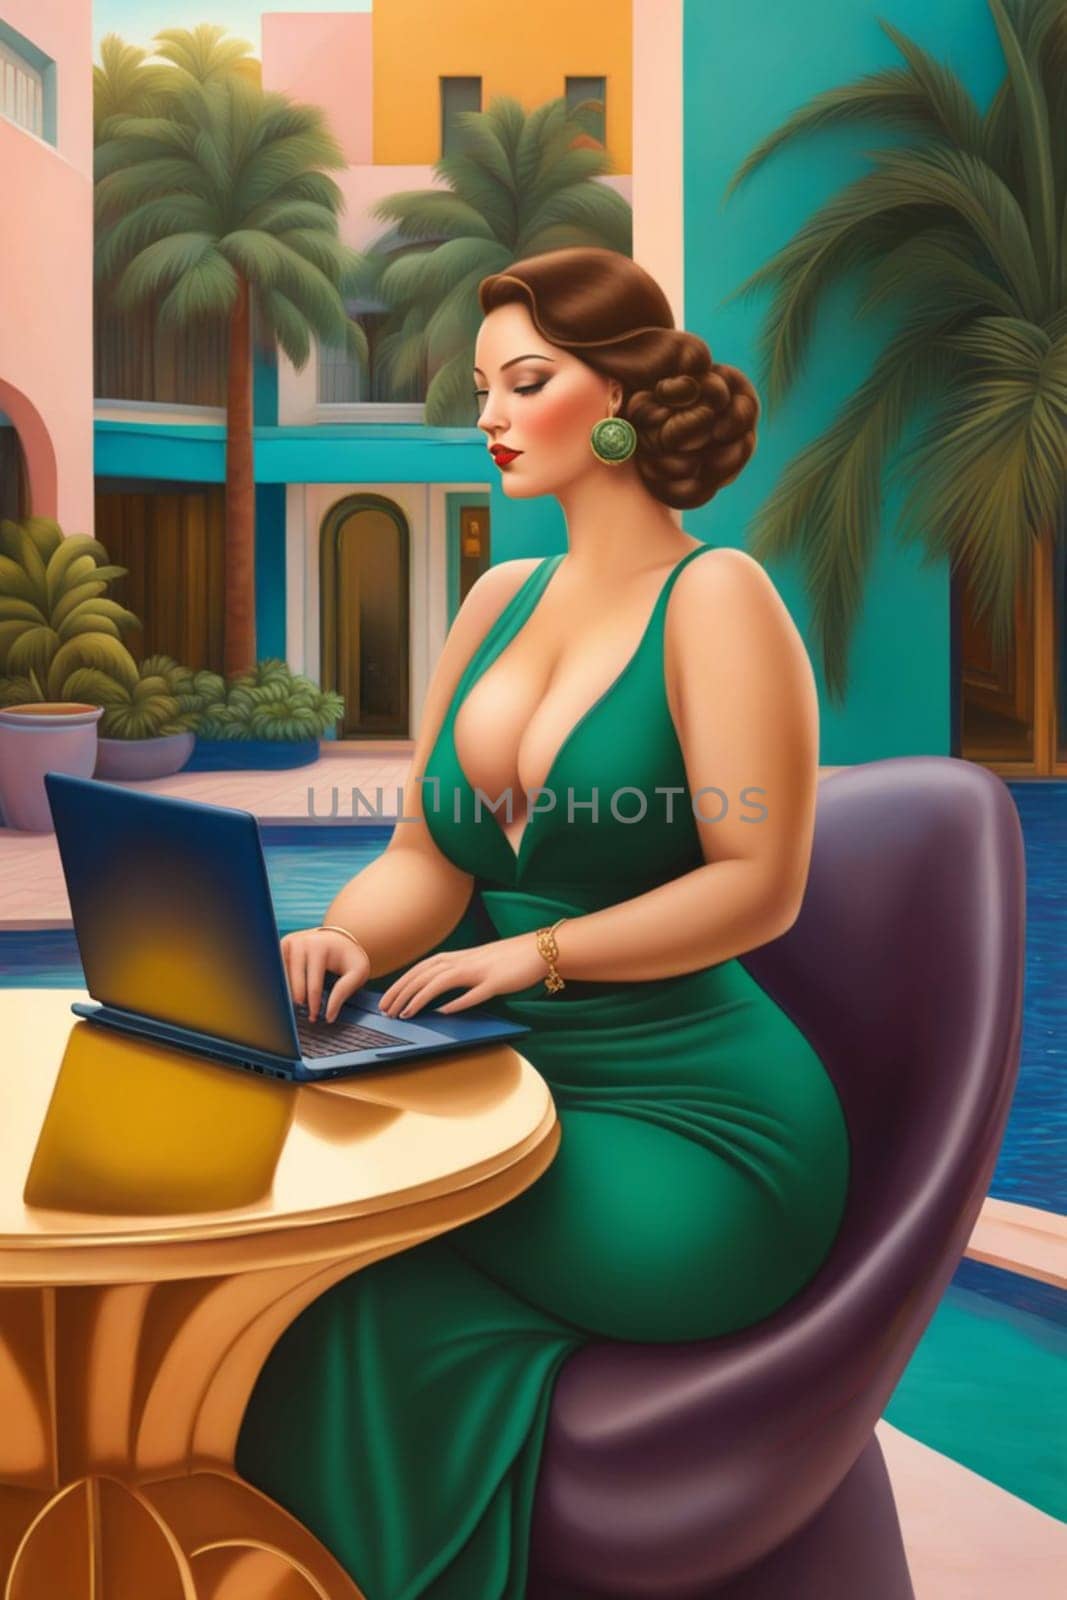 iilustration poster of voluptous female model remote working outdoors in a yard in caribbean villa by verbano